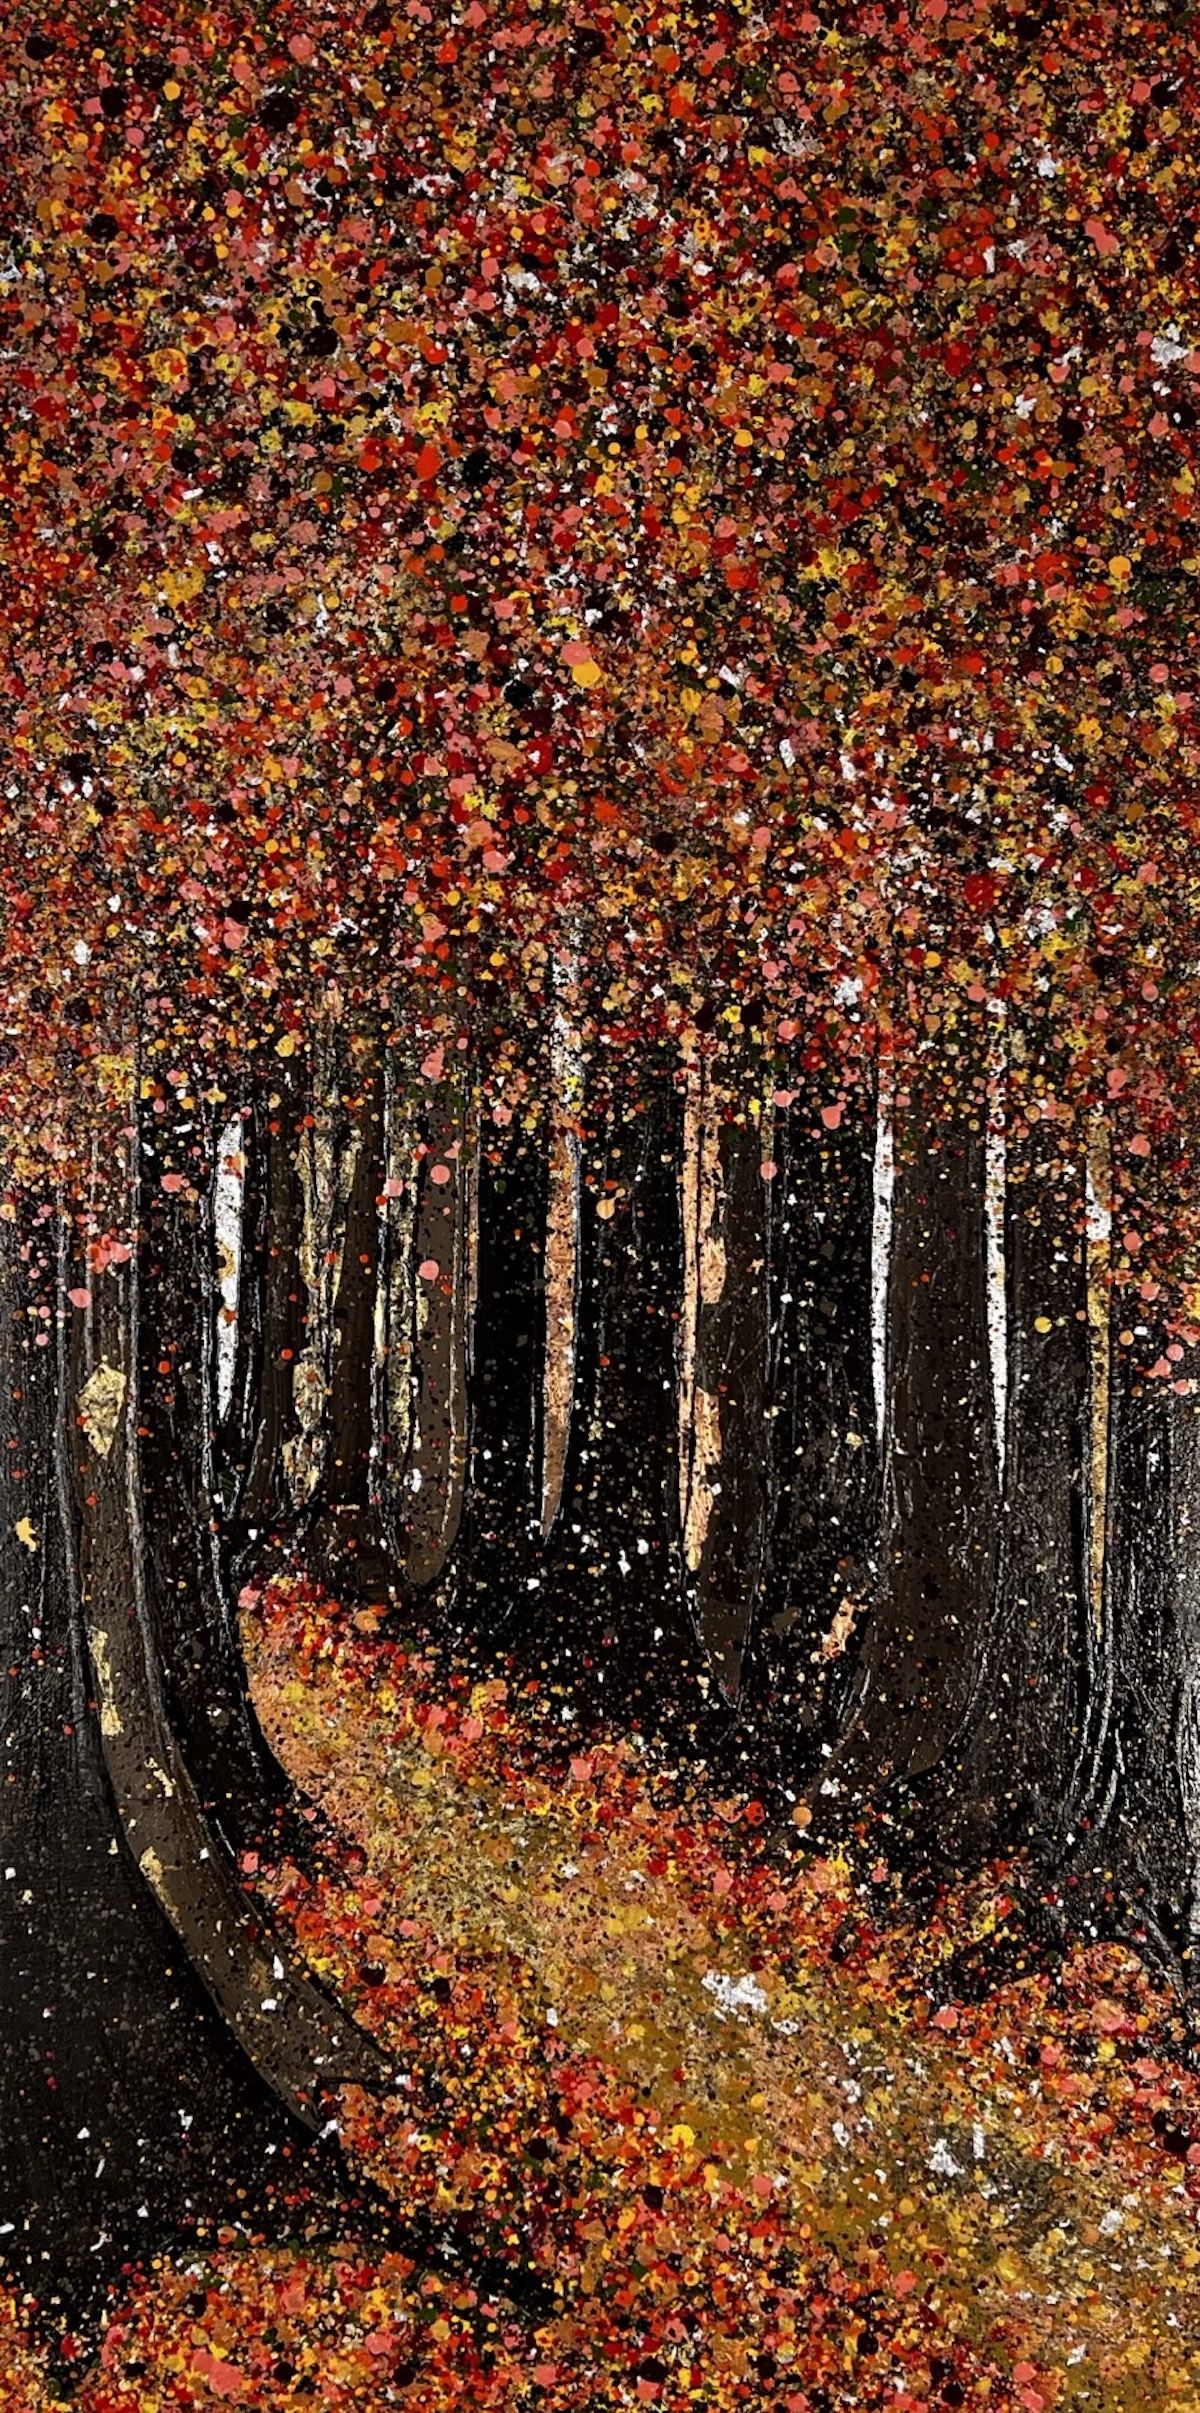 In the Beautiful Autumn Wood by Nicky Chubb